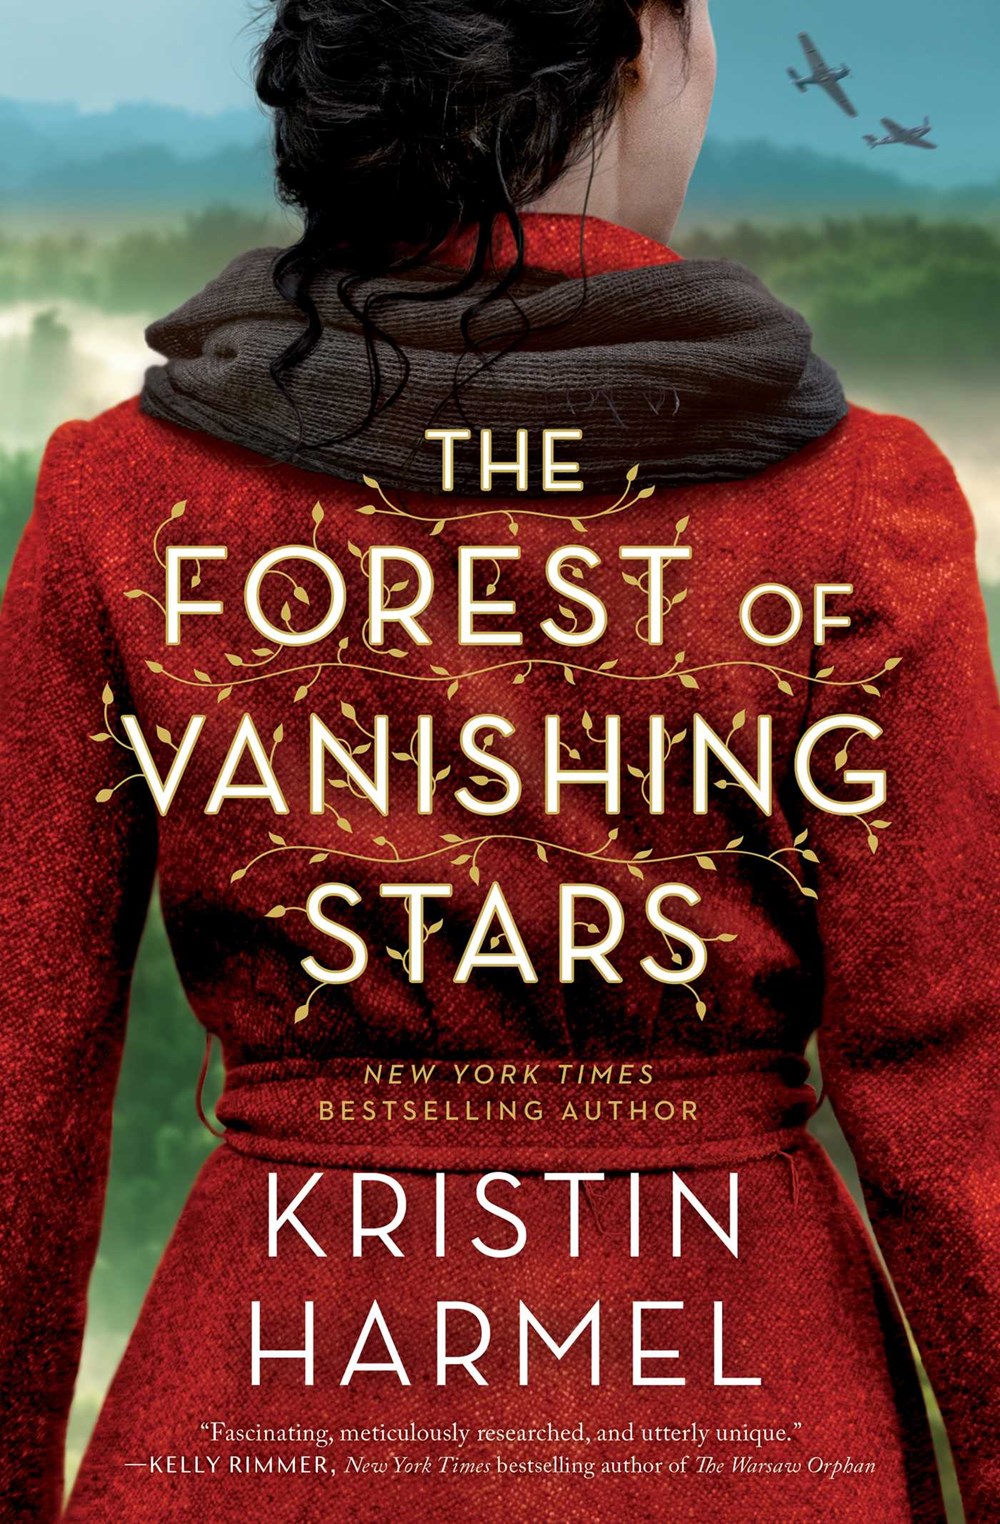 
The Forest of Vanishing Stars : How to Come Out in a Walmart Parking Lot and Other Life Lessons